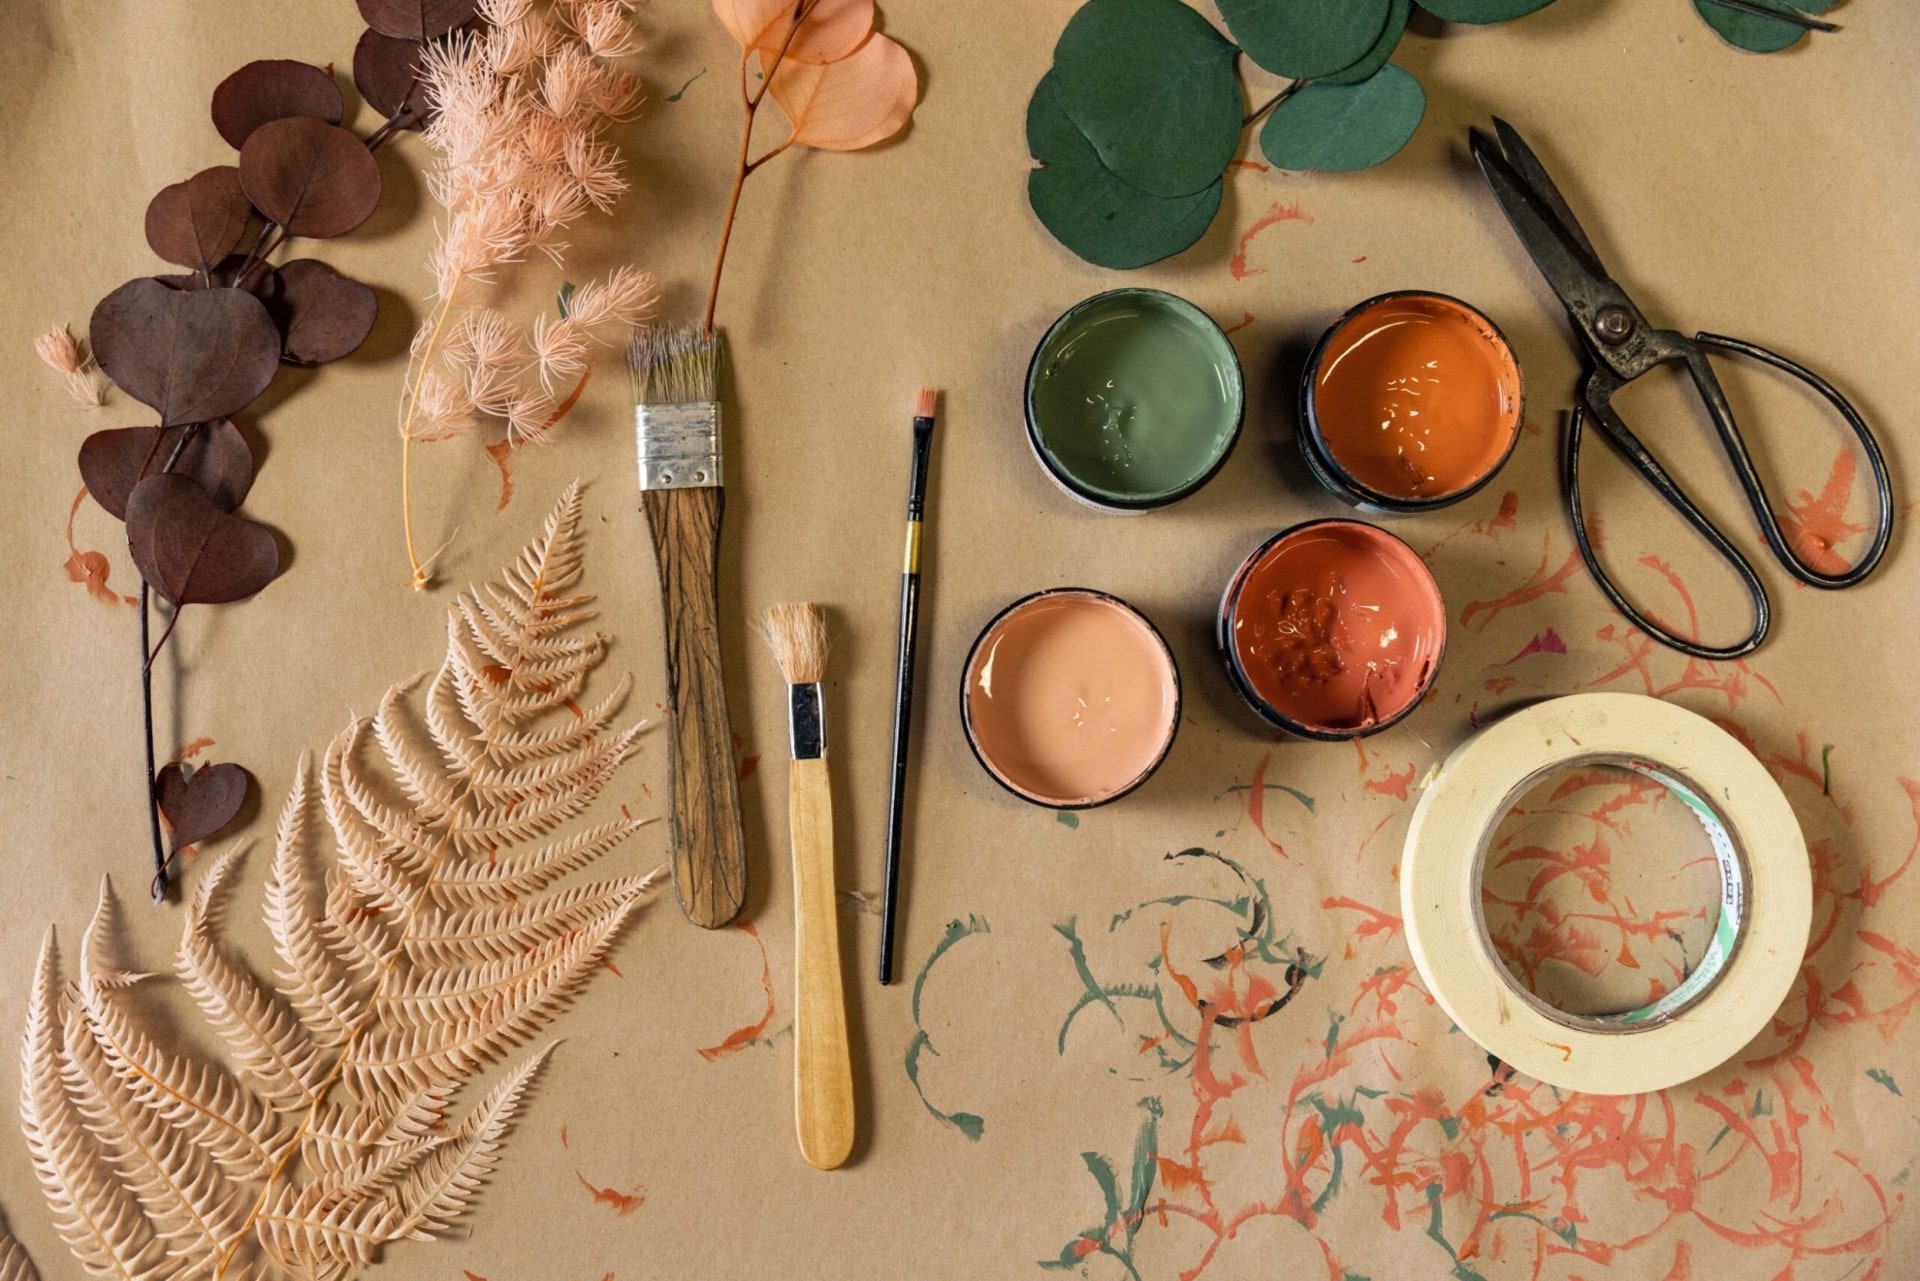 A flat lay of various botanicals, paint, paint brushes, tape and scissors